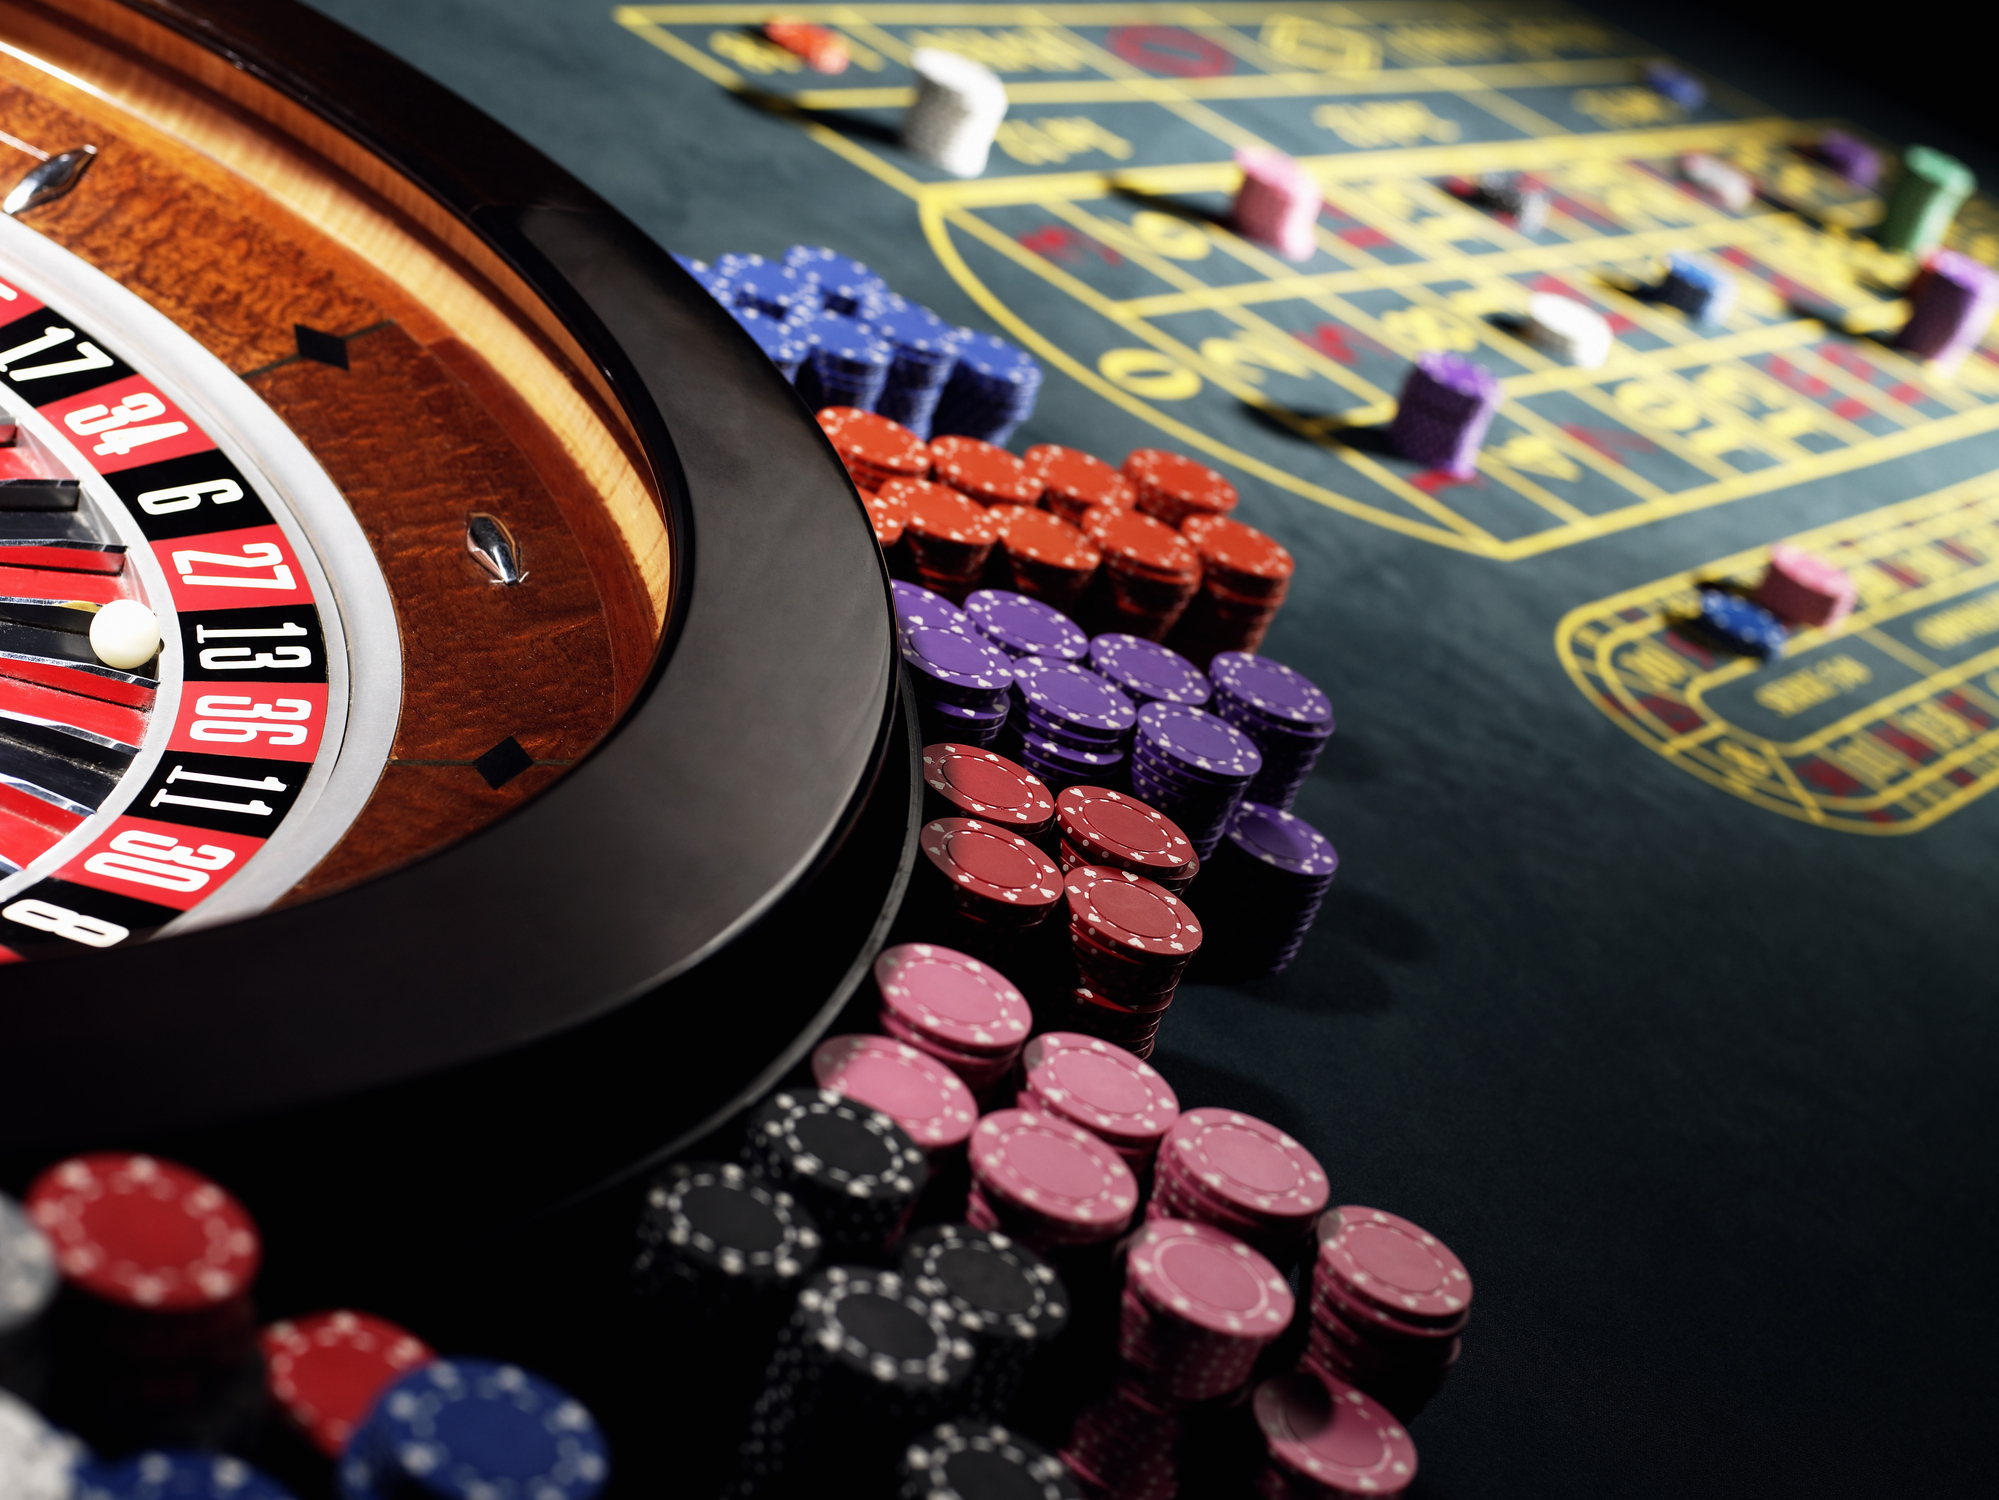 Find A Quick Way To Evolution of India's iGaming: Tracing the Path of Online Gambling